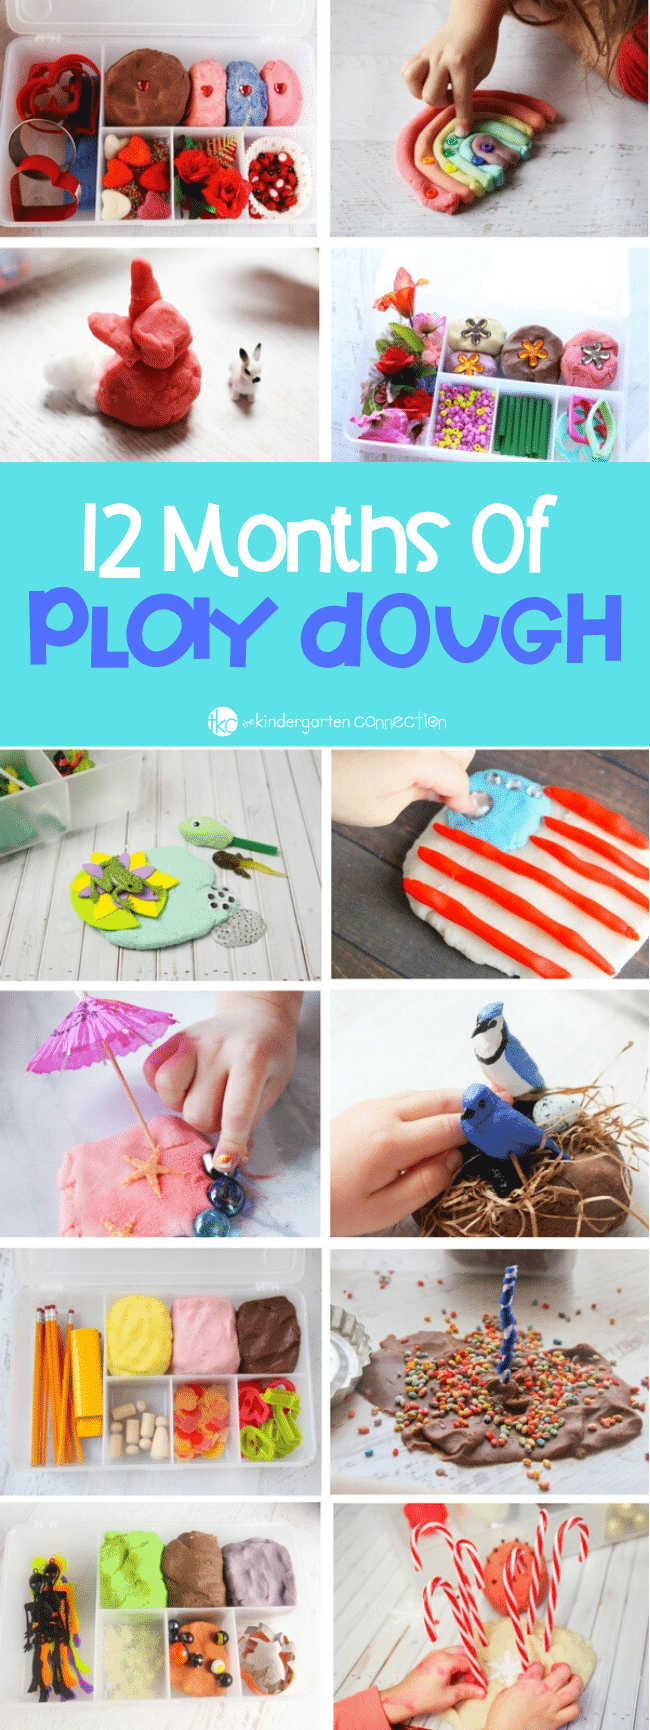 12 Months Of play dough. Ideas for all 12 months, to have themed play dough in your classroom, homeschool or simple activities for kids at home. All ideas are super fun ways to incorporate sensory activities into your kids' lives!#sensoryactivities #playdough #preschoolclassroom #homeschool